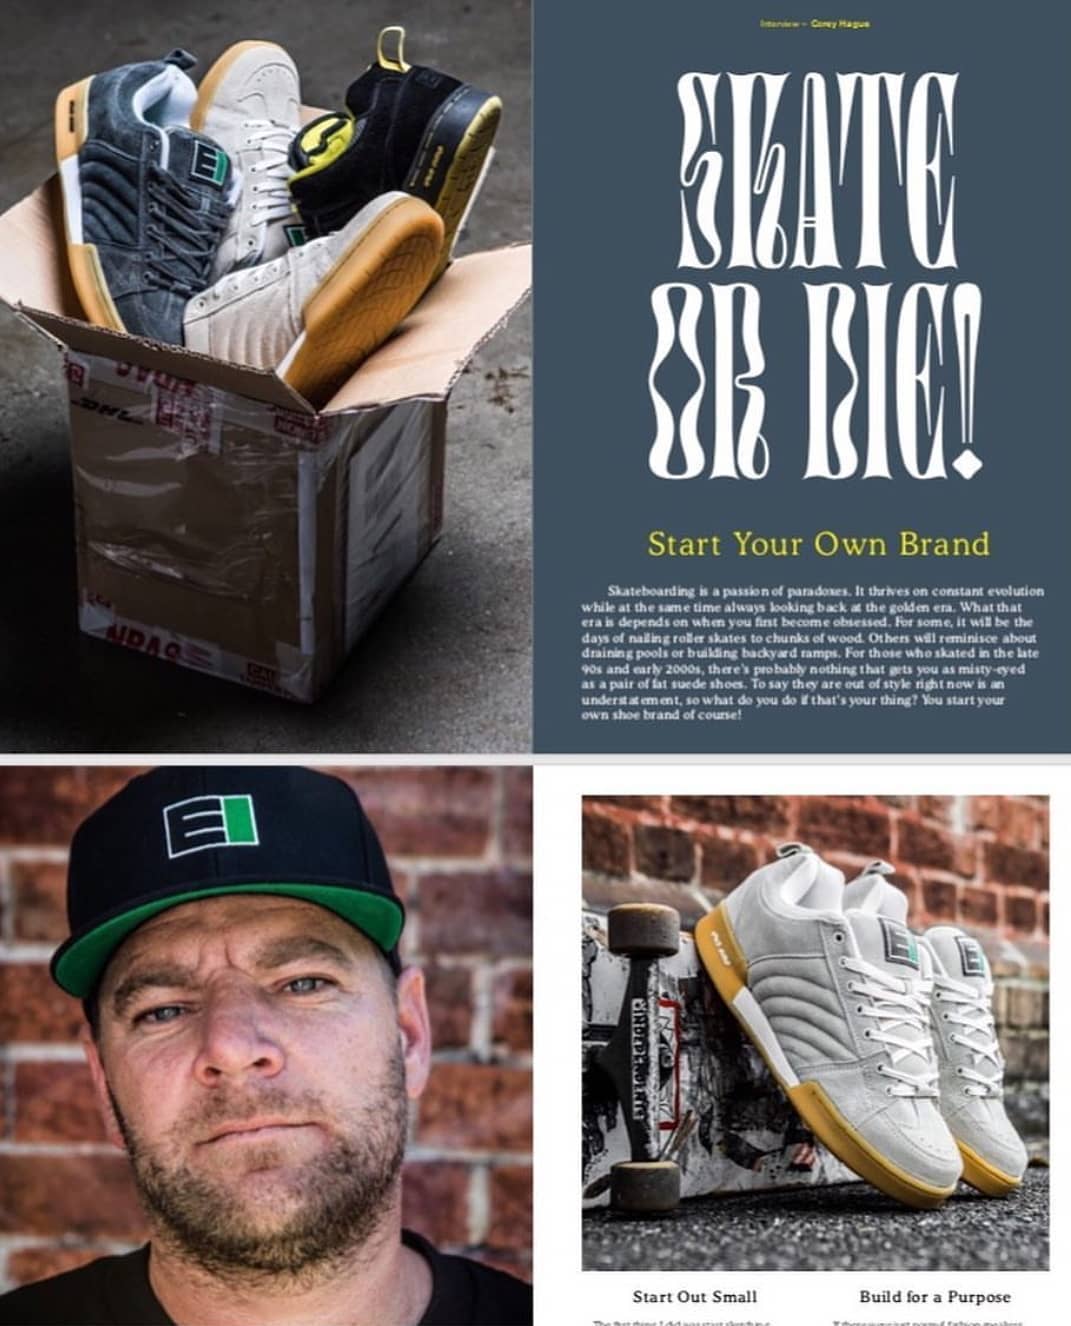 Congrats to @eraonefootwear for being in the @sneakerfreakermag  issue 40. So sick to see it come all this way.